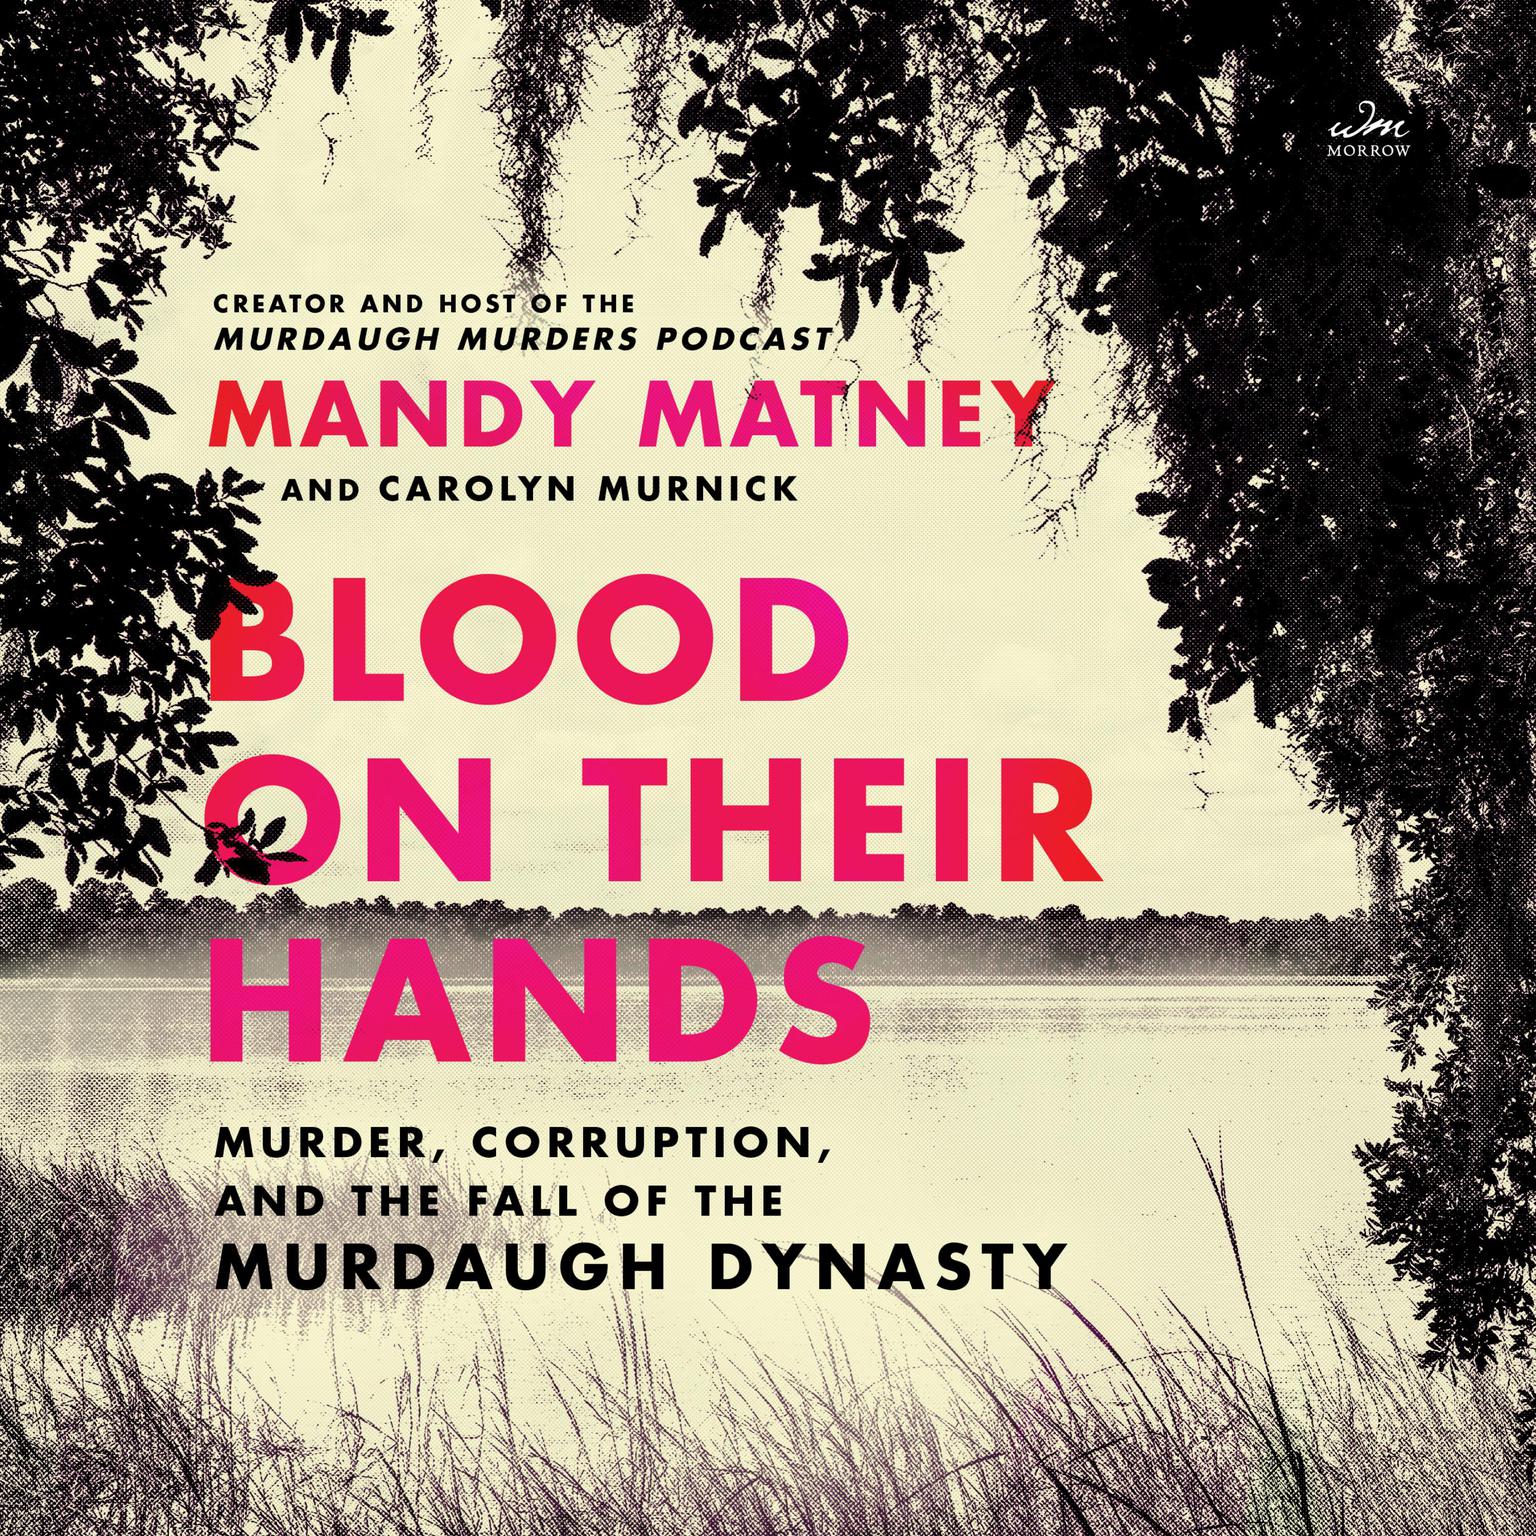 Blood on Their Hands: Murder, Corruption, and the Fall of the Murdaugh Dynasty Audiobook, by Mandy Matney